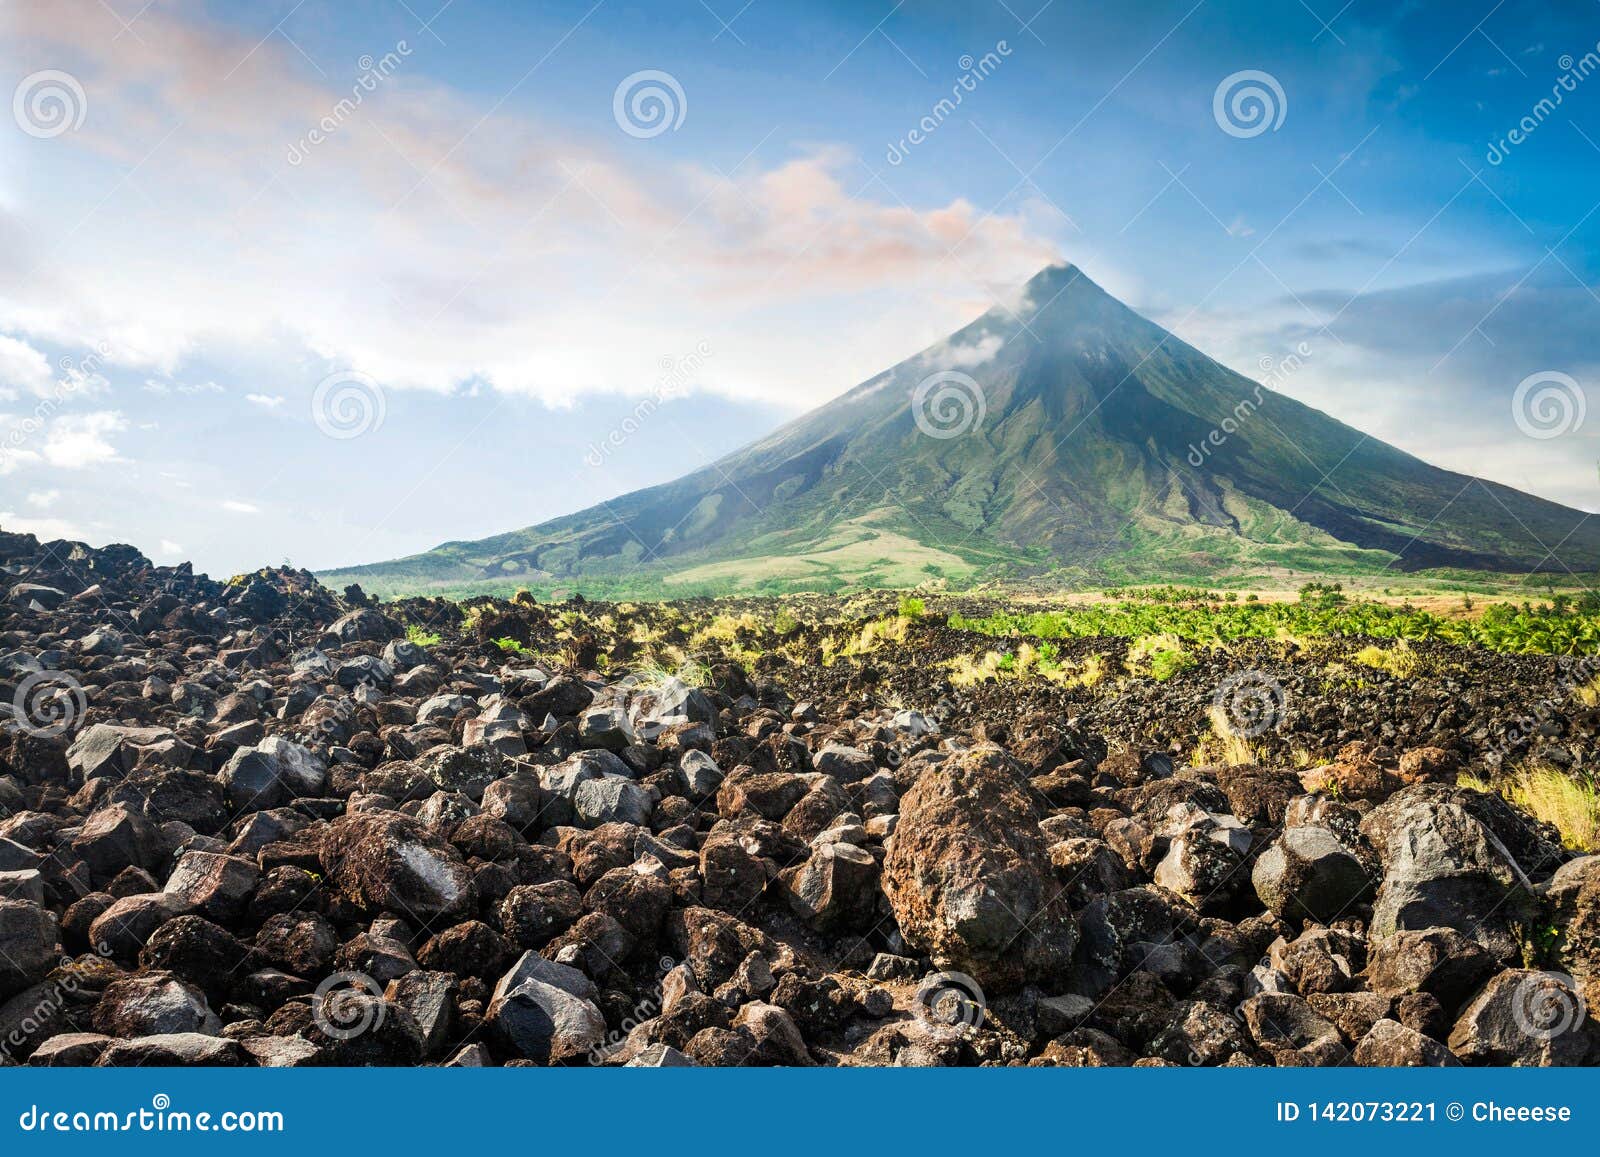 mayon volcano is an active stratovolcano in the philippines.